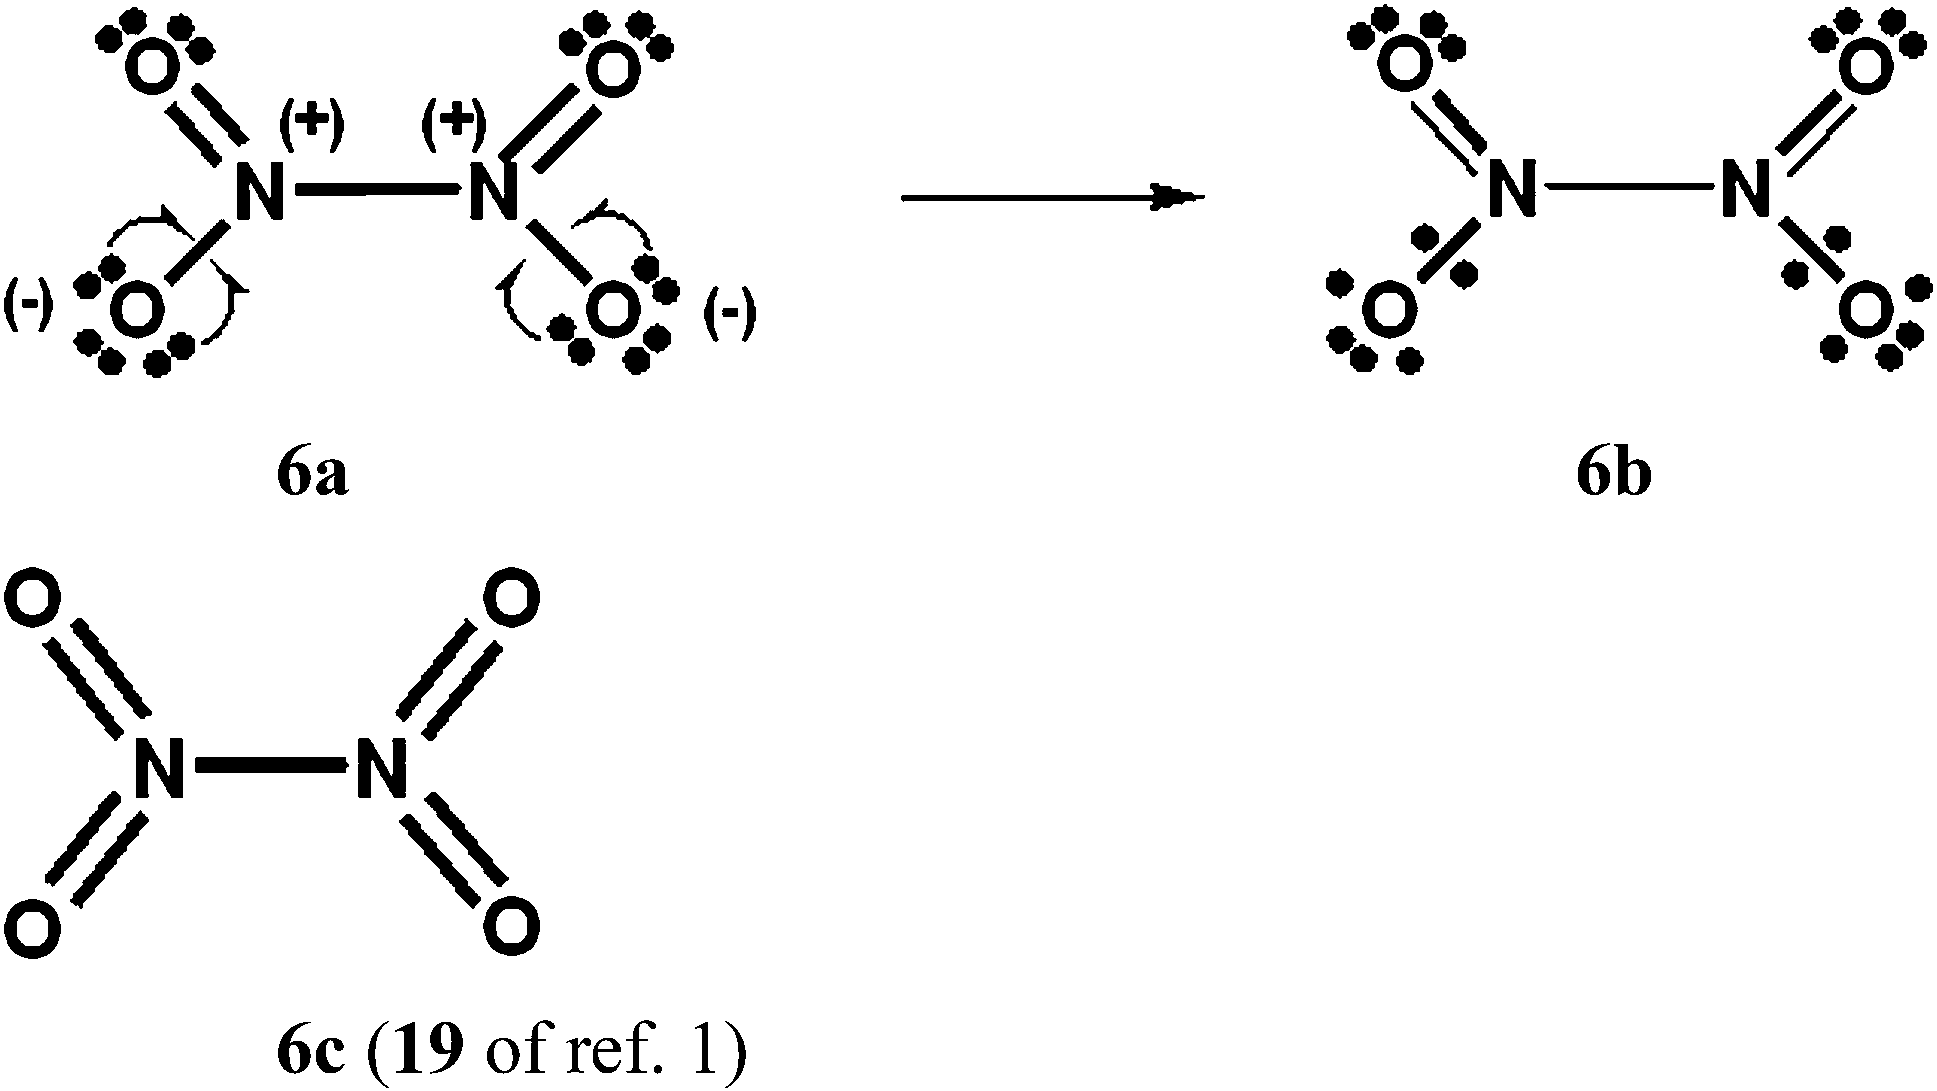 Increased-valence structures for SO42-, NO3- and N2O4.